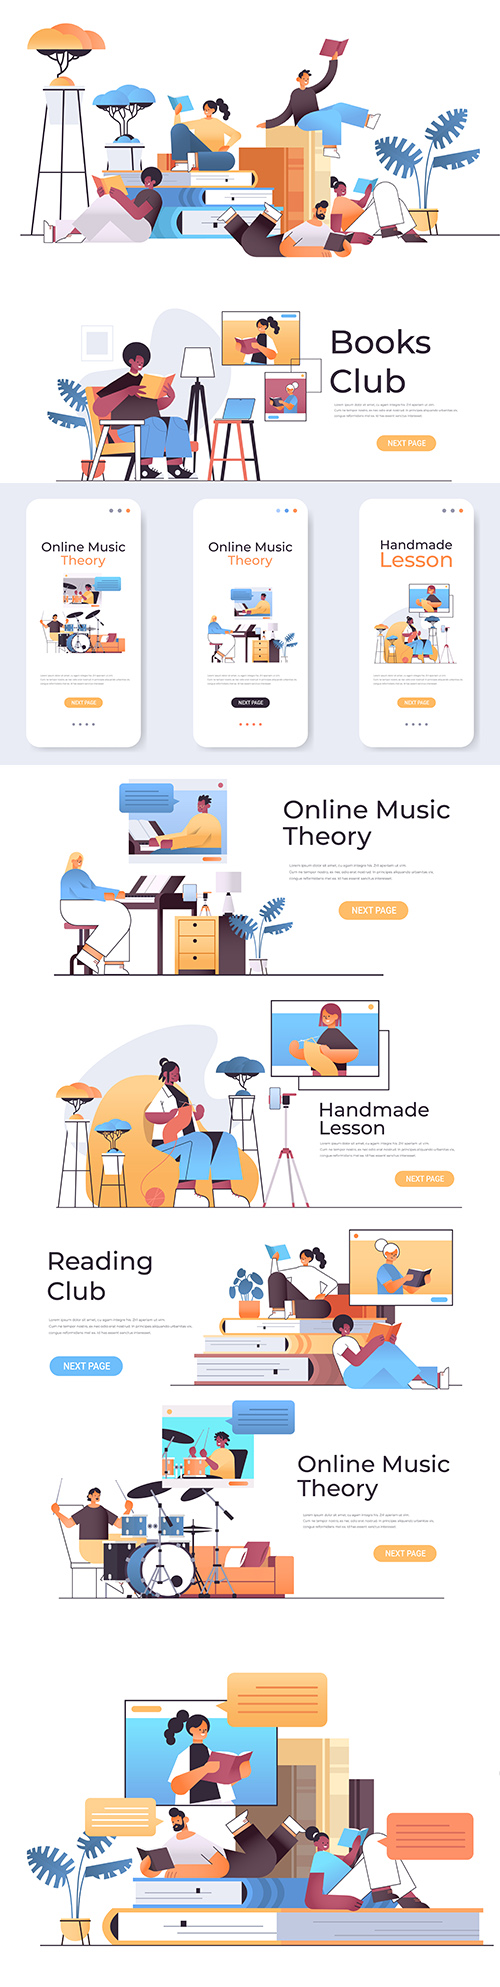 People online hobby and illustration training flat design
